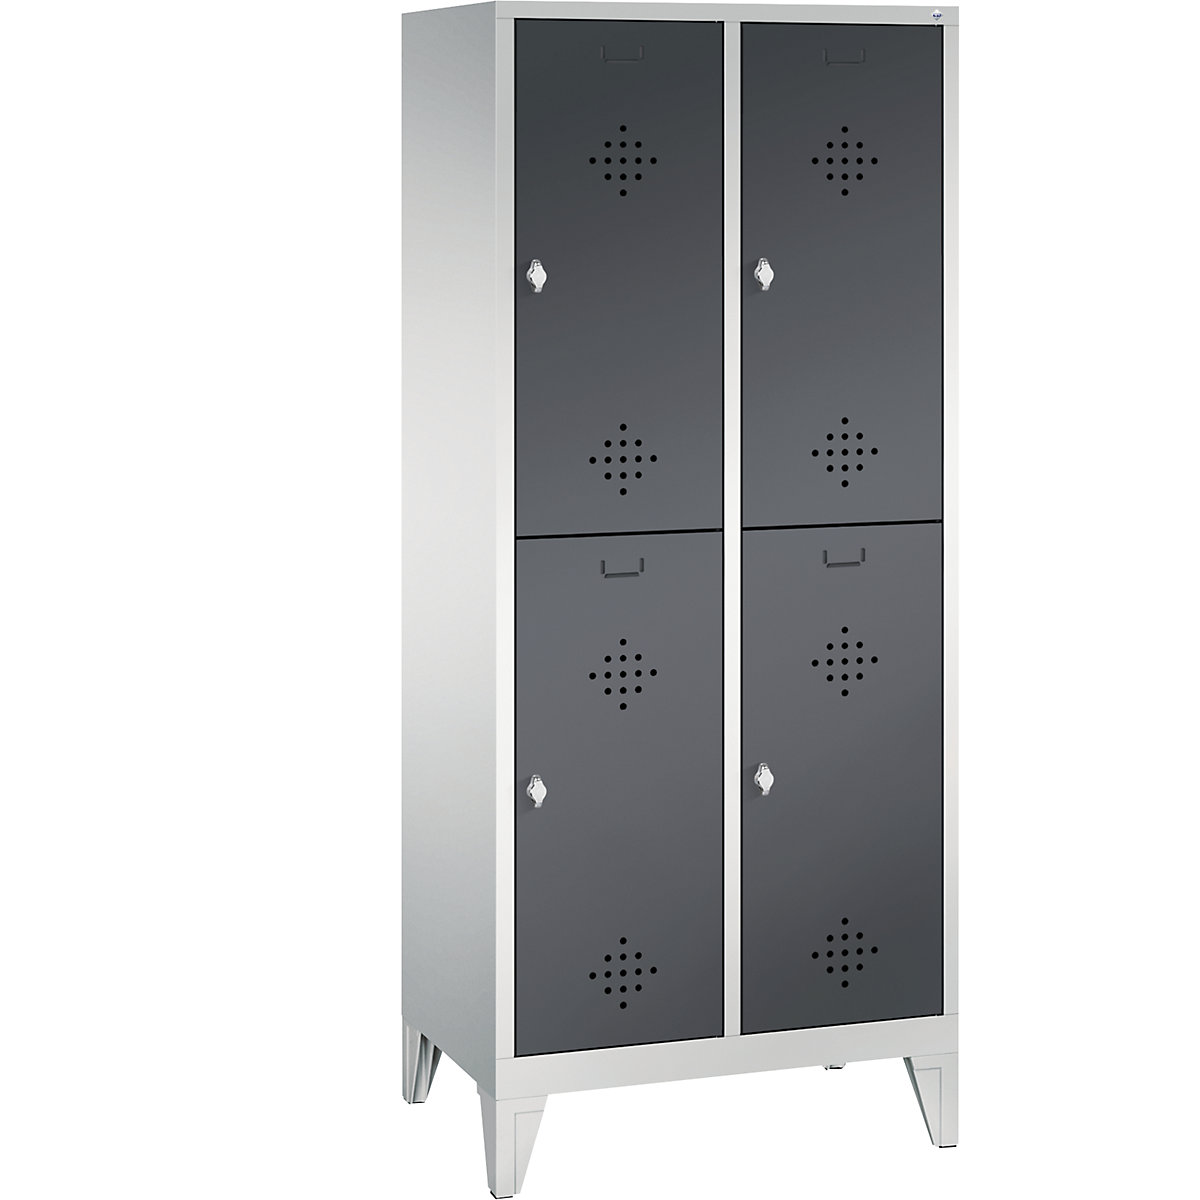 CLASSIC cloakroom locker with feet, double tier – C+P, 2 compartments, 2 shelf compartments each, compartment width 400 mm, light grey / black grey-10